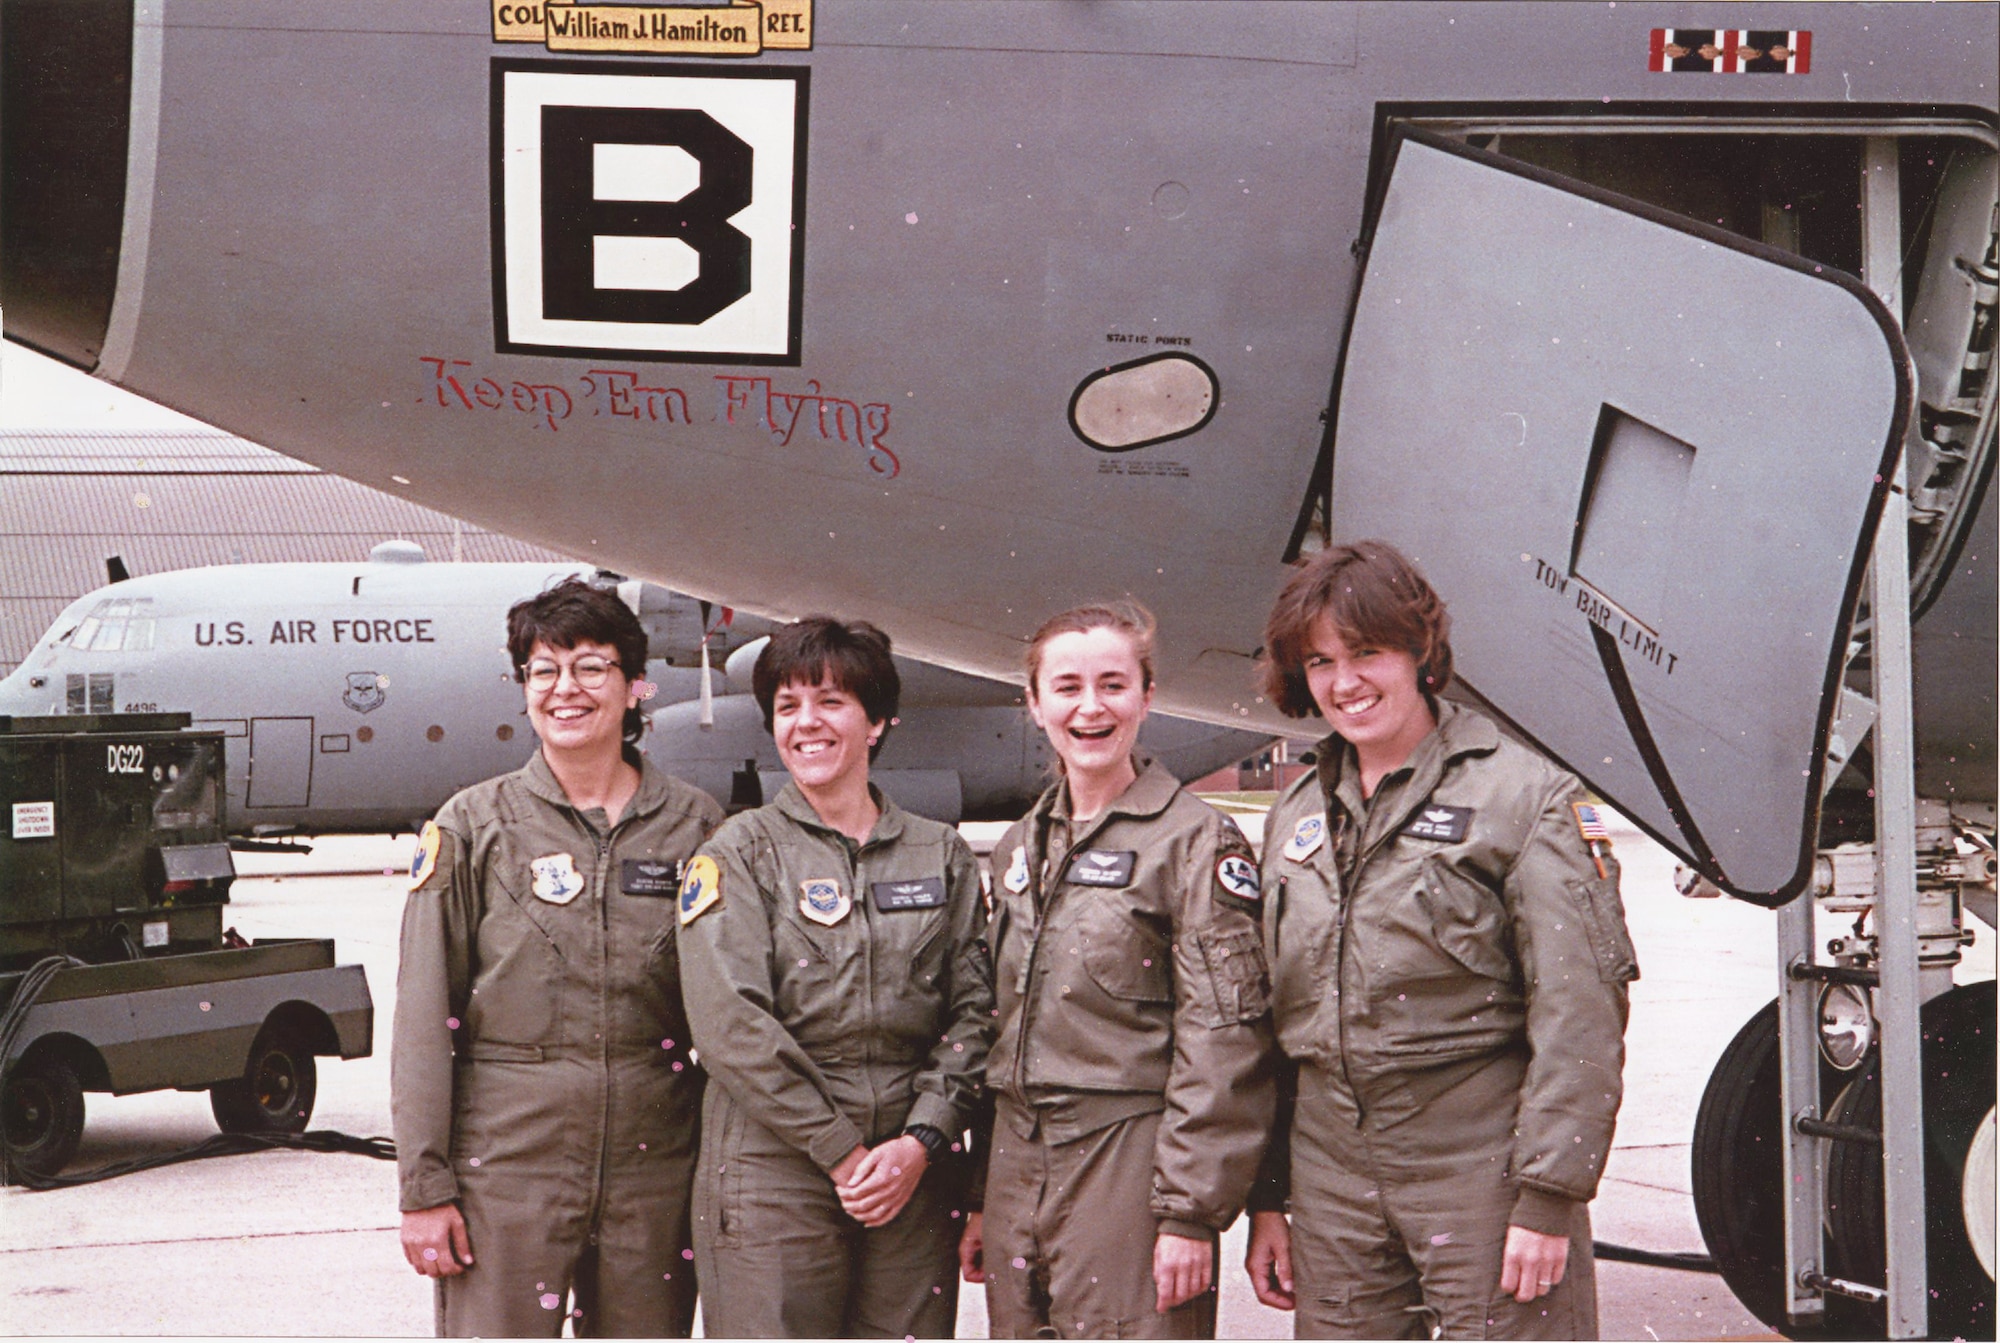 ANDREWS AIR FORCE BASE, MD.-- In this scanned photo from October 1997, from left to right, Tech. Sgt. Elaina D’Orto, Maj. Nicole Bixler, 1st Lt. Justyna Hudson and Capt. Laurie Farris stand beside a Pease KC-135 Stratotanker after flying a group of veterans to the dedication ceremony for the Air Force Women’s Memorial at Arlington National Cemetery. Bixler was the navigator for the first ever all-female flight crew that made the historic flight. (N.H. Air National Guard photo by Maj. Bill Becker)